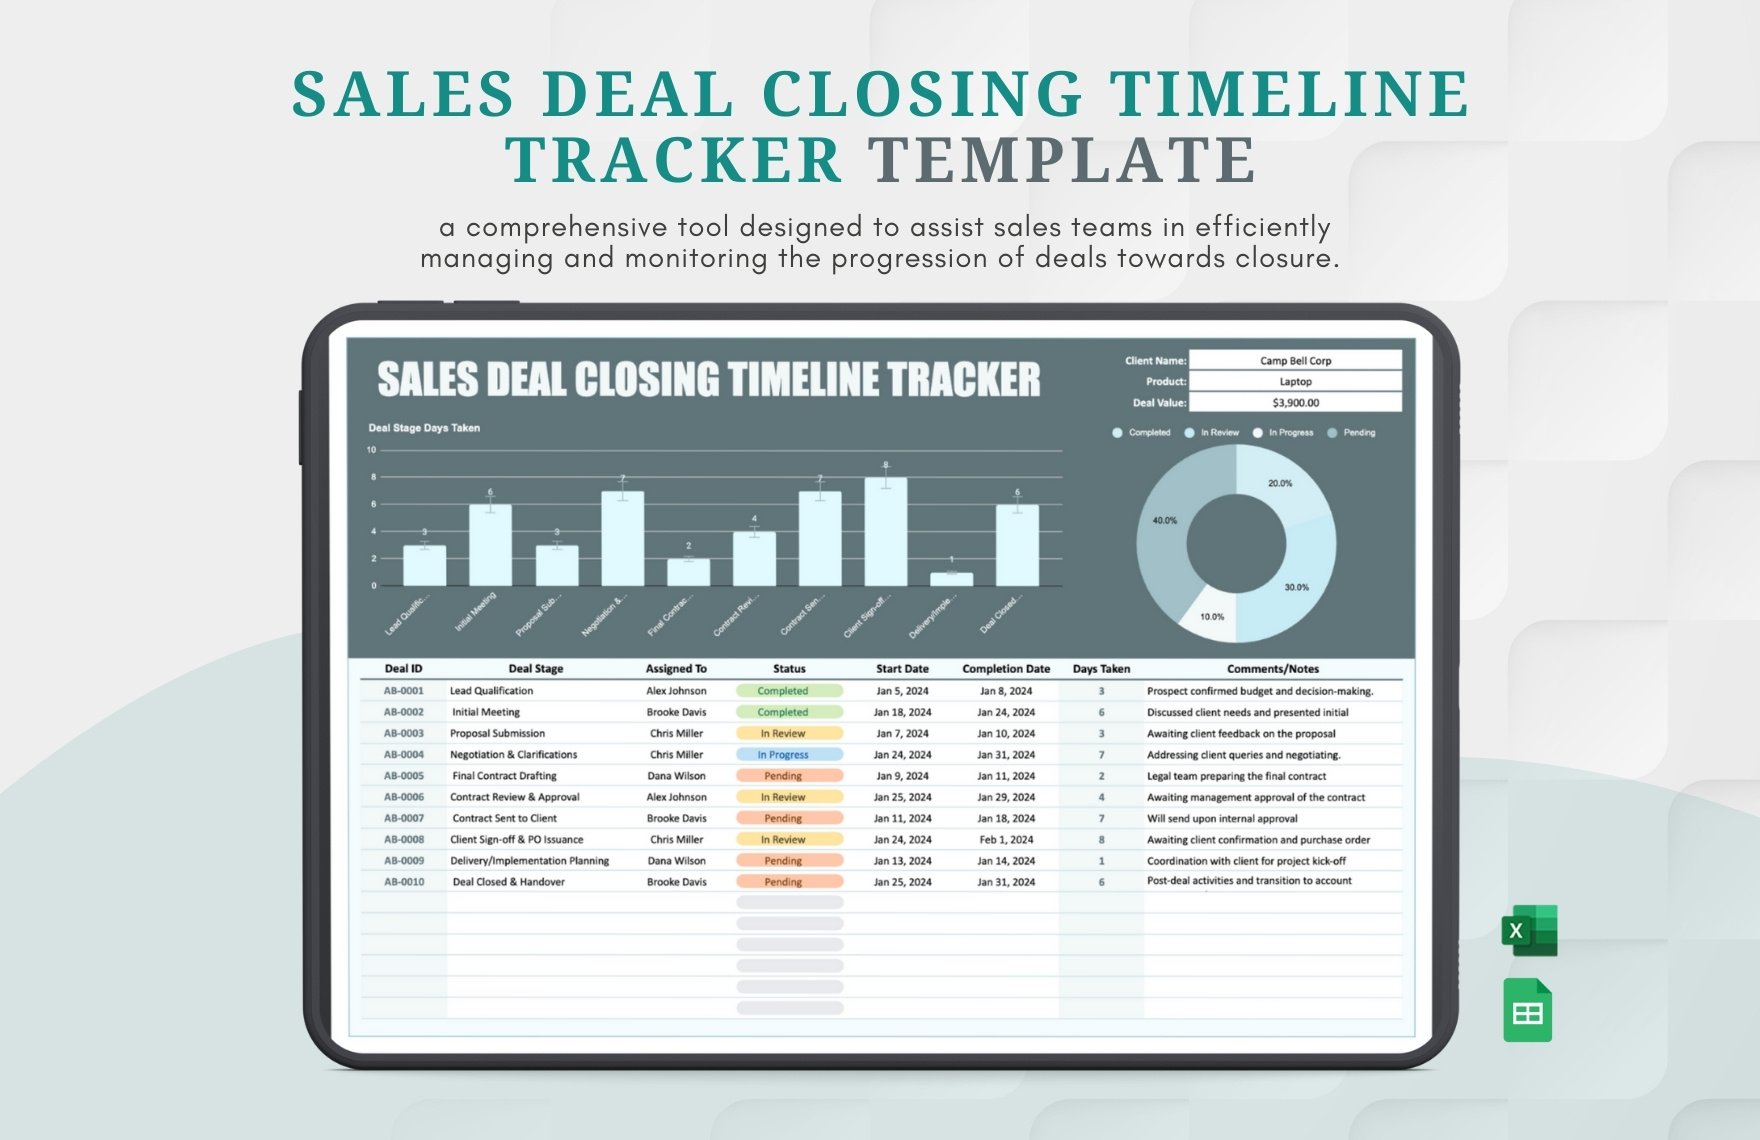 Sales Deal Closing Timeline Tracker Template